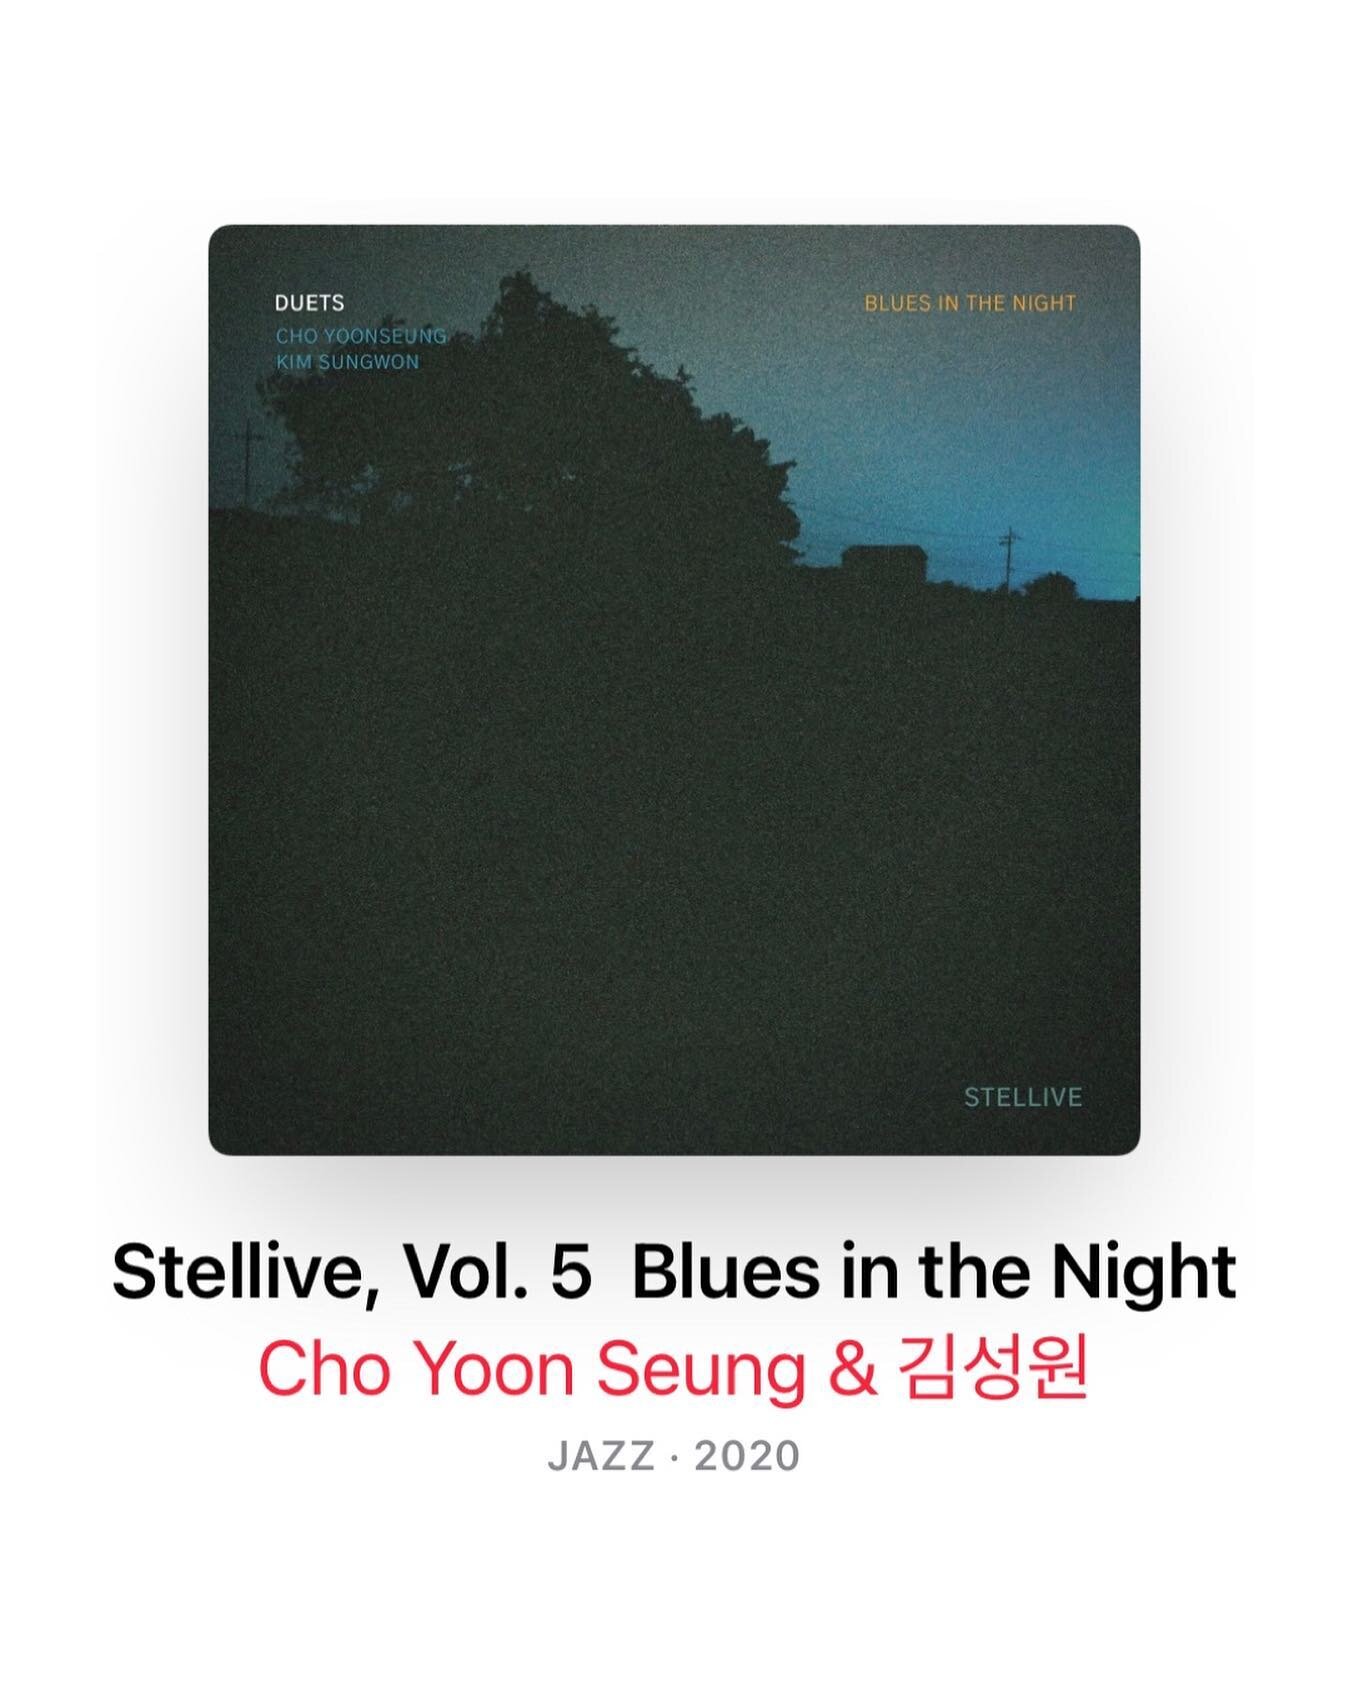 Duo album with @choyoonseung just came out. Available in Apple Music. 피아니스트 조윤성씨와 함께한 앨범이 애플뮤직, 멜론 등 각종 음원 사이트에 발매 되었습니다. Thanks to @stellive.kr @boom.iz  #jazz #guitar #live #record #piano #blues #choyoons